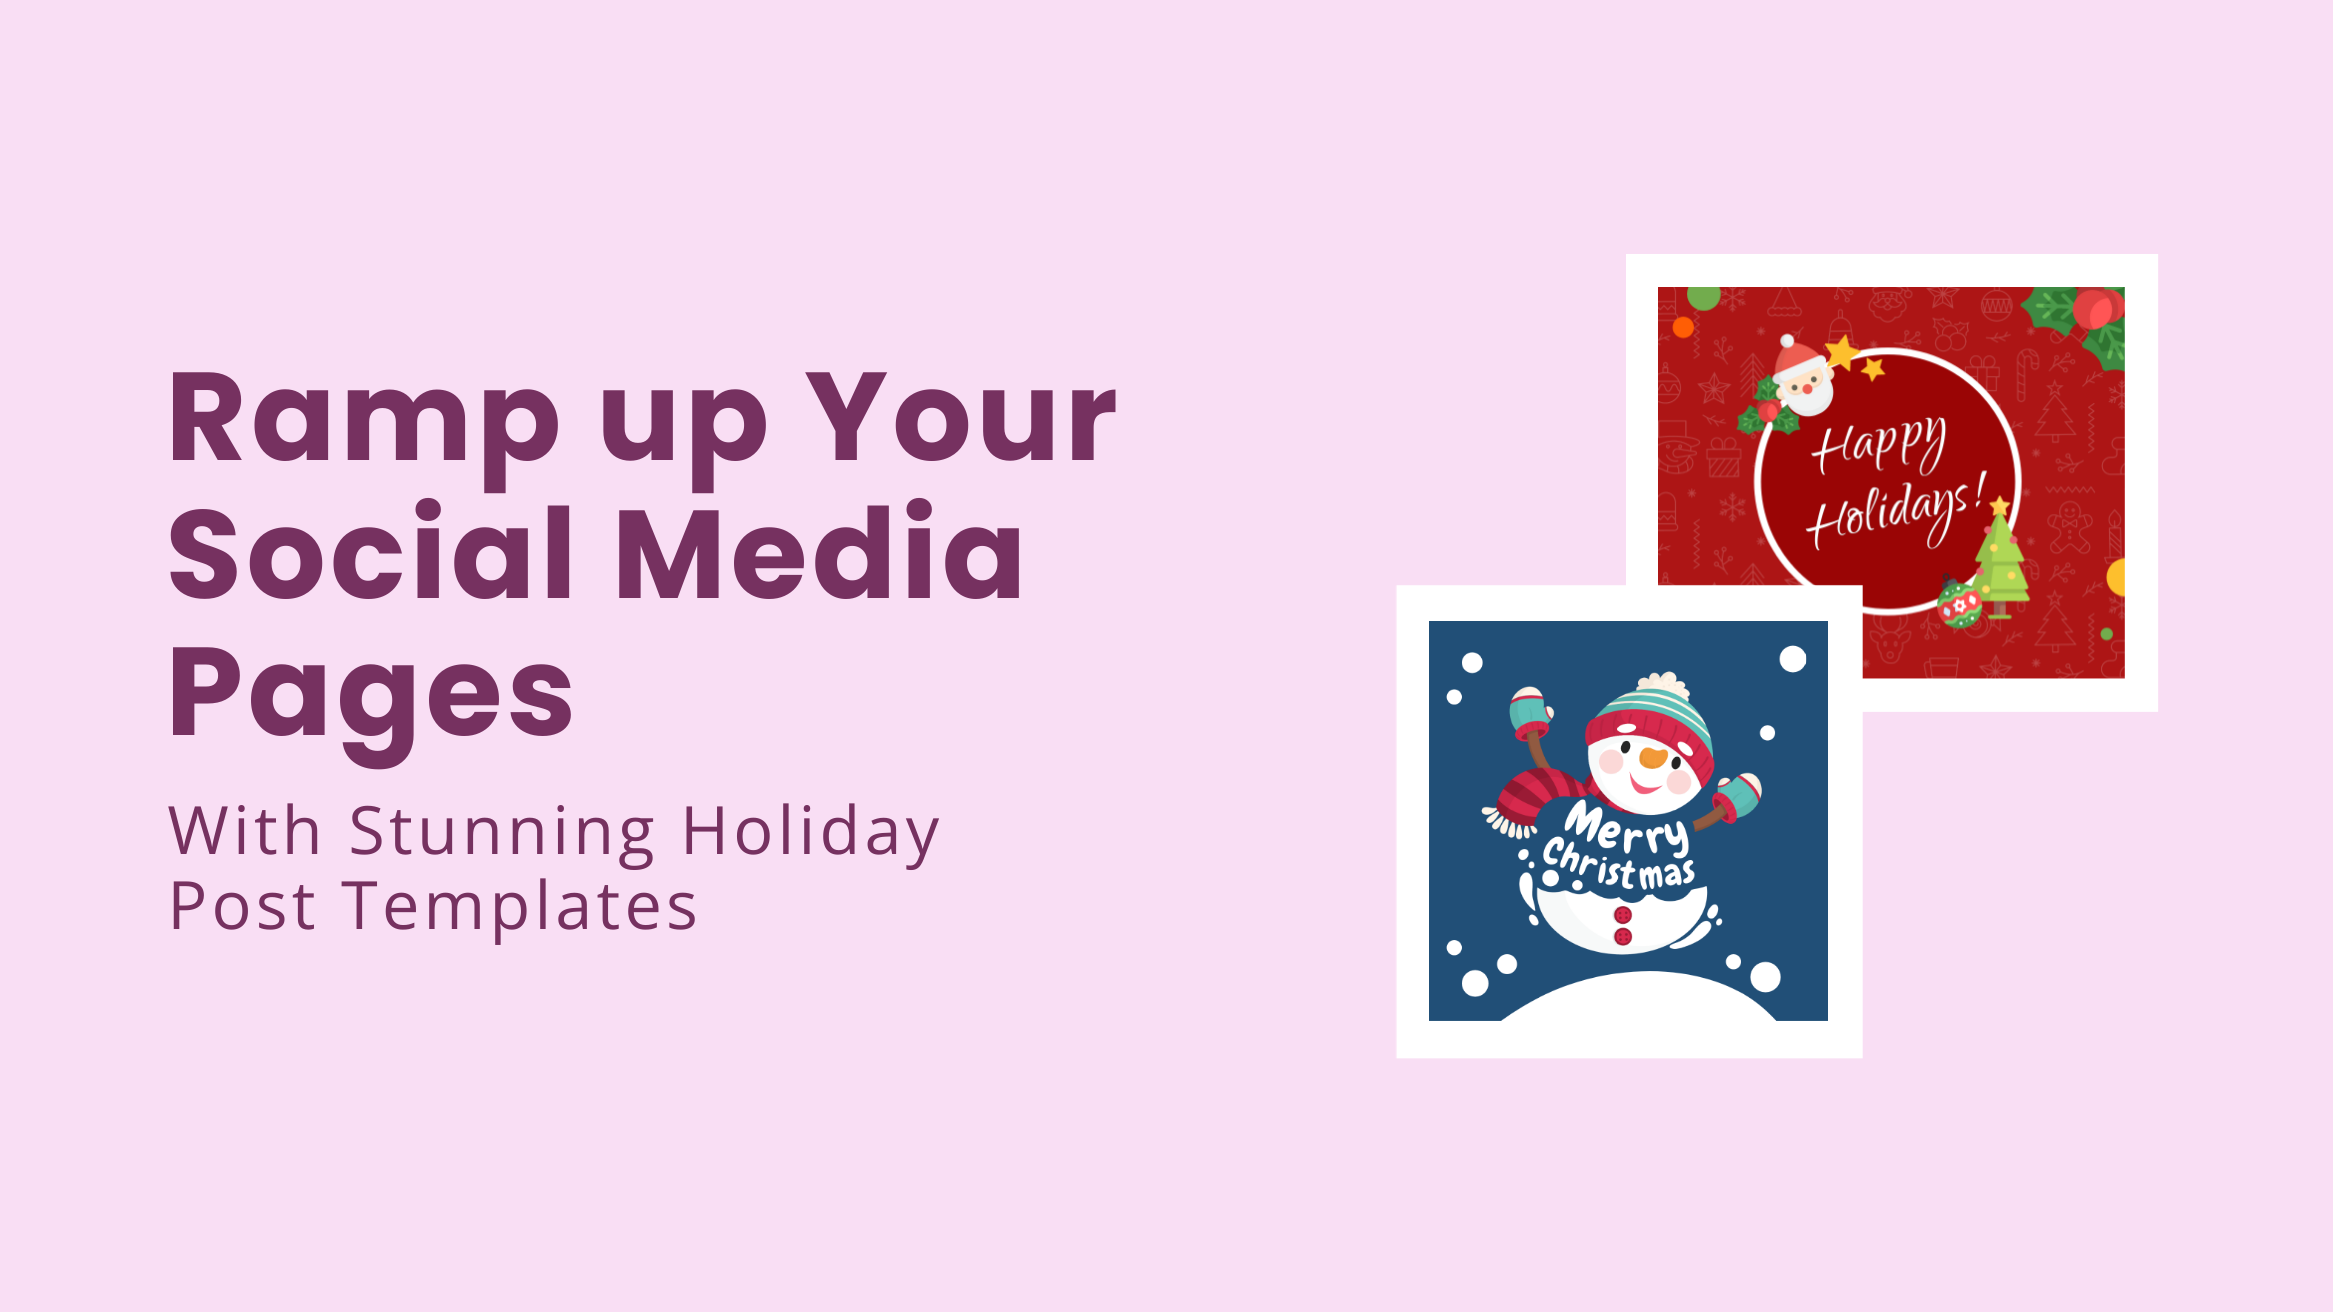 Ramp up Your Social Media Pages with Stunning Holiday Post Templates